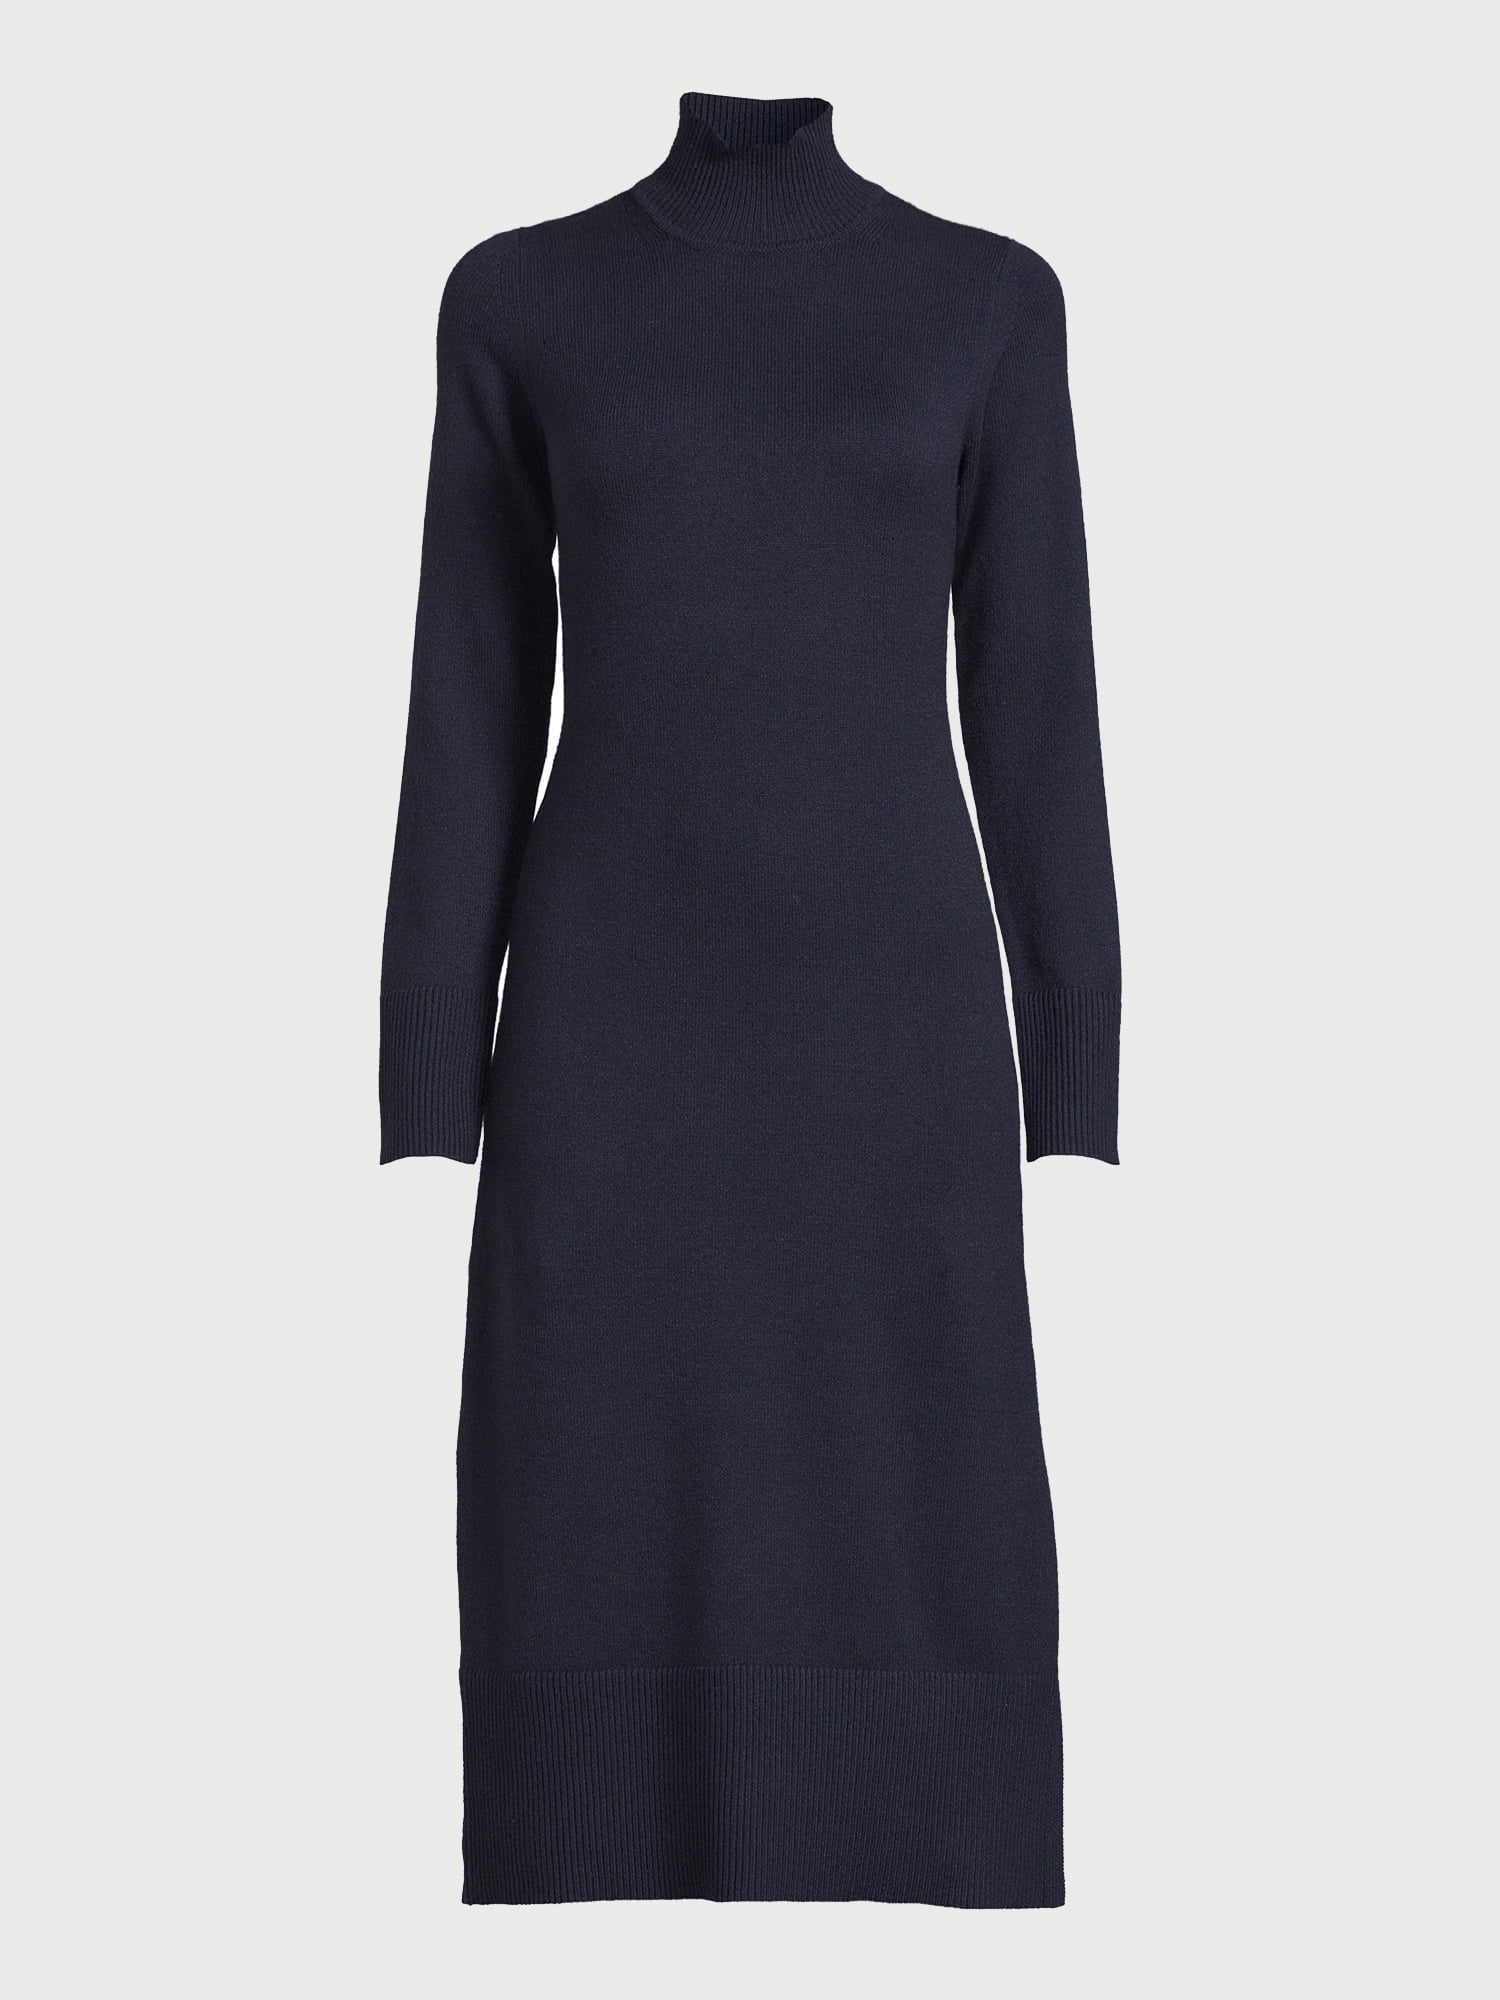 Free Assembly Women’s Turtleneck Sweater Midi Dress with Long Sleeves, Sizes XS-XXXL - image 6 of 10